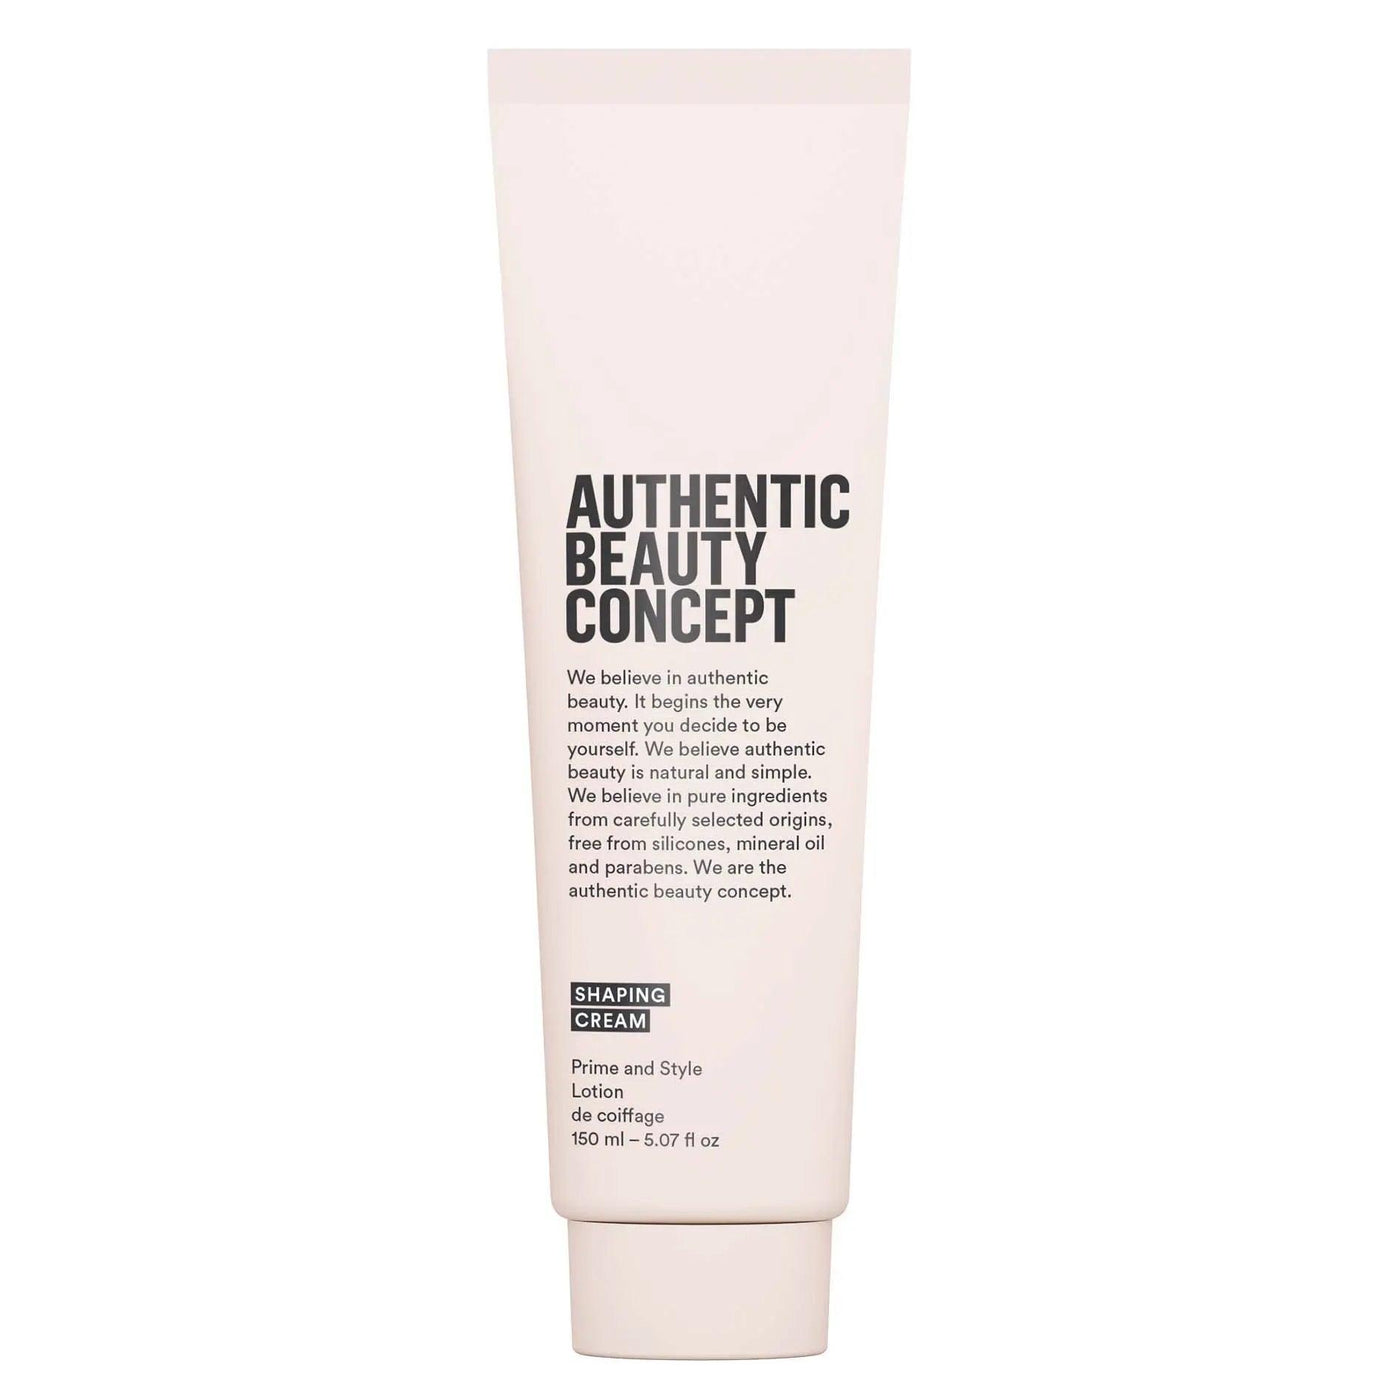 SHAPING CREAM 150ML Authentic Beauty Concept Boutique Deauville